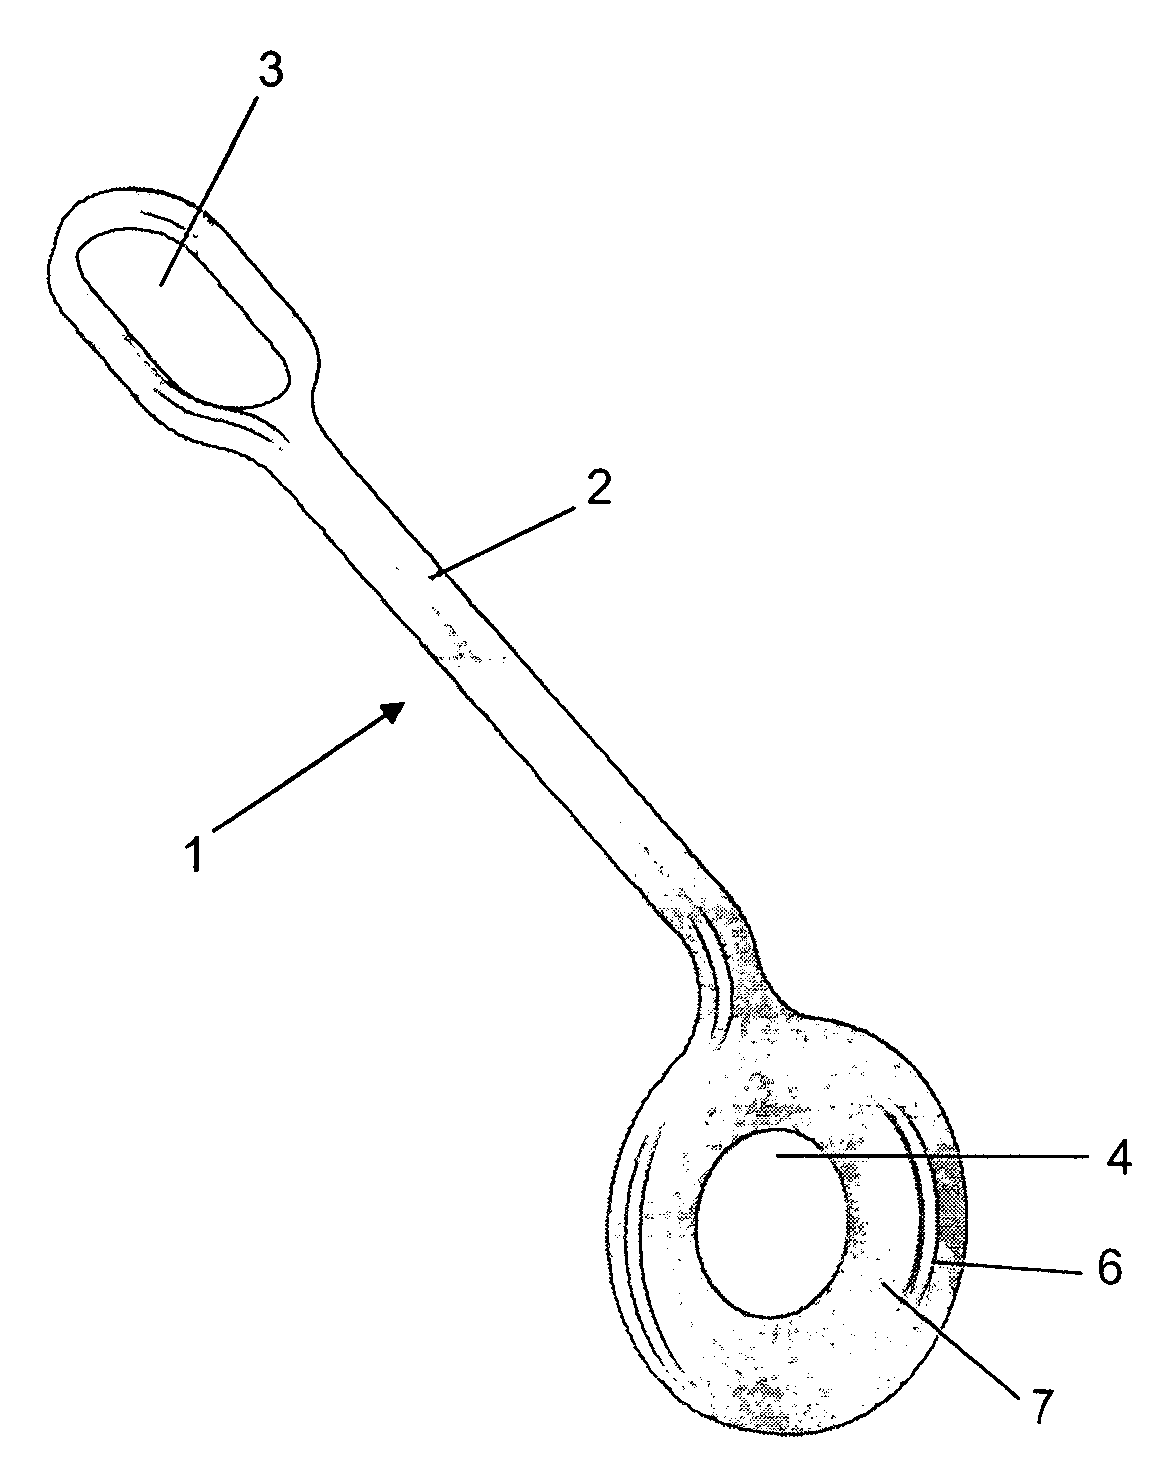 Intraosseous fixation device for reconstructing the knee posterior cruciate ligament